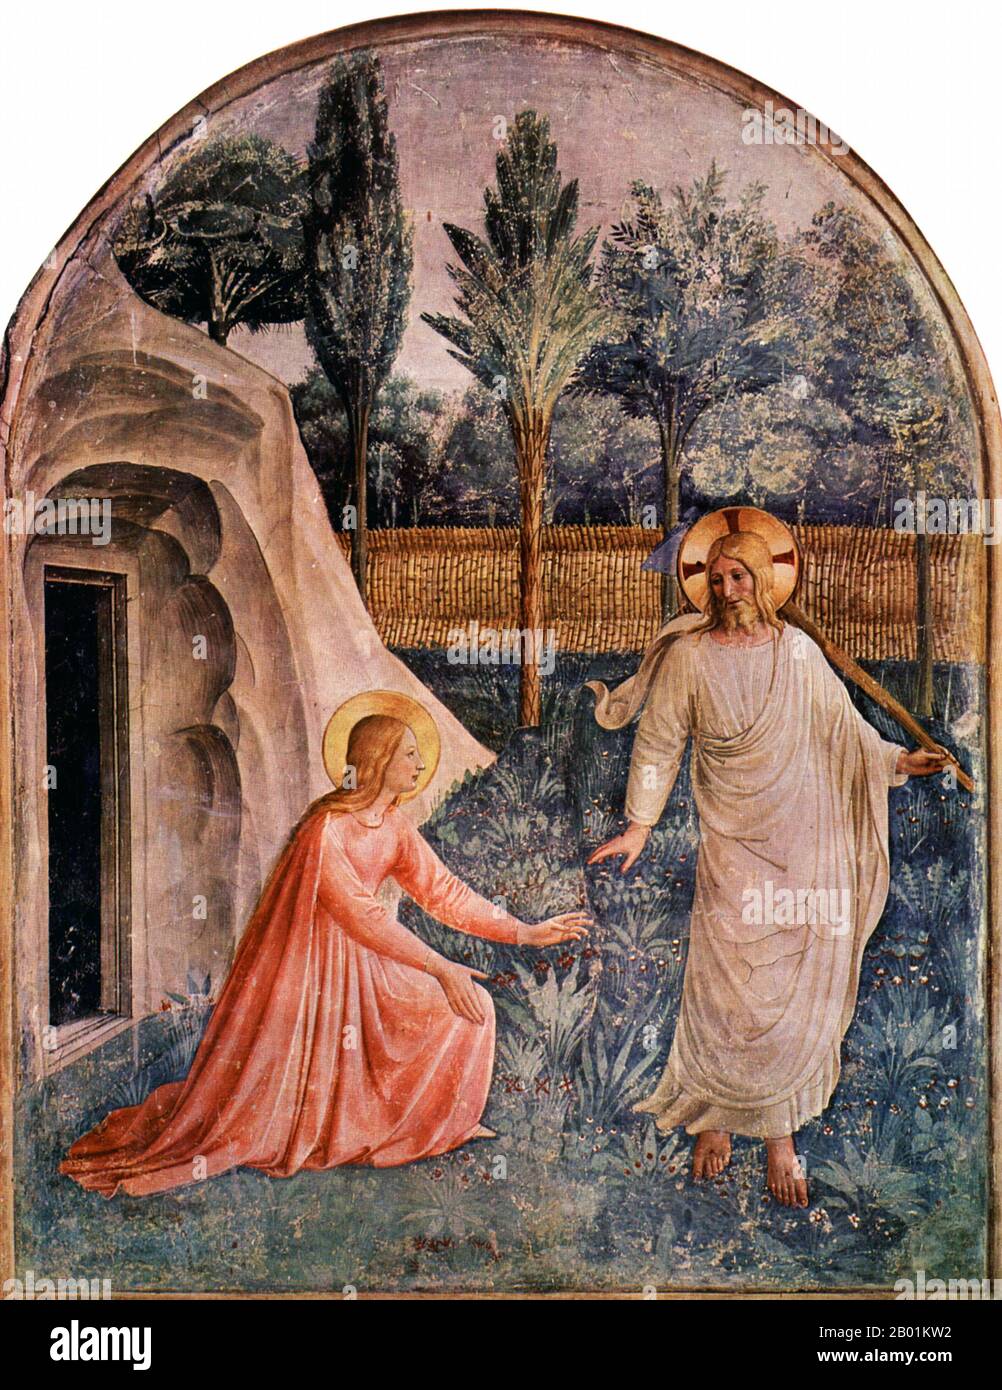 Italy: 'Noli Me Tangere (Touch Me Not)'. Fresco by Fra Angelico (c. 1395 - 18 February 1455), c. 1439-1443.  The appearance of Christ to Mary Magdalene.  Mary Magdalene was one of Jesus' most celebrated disciples, and the most important woman disciple in the movement of Jesus. Jesus cleansed her of 'seven demons', [Luke 8:2] [Mark 16:9] conventionally interpreted as referring to complex illnesses. She became most prominent during his last days, being present at the cross after the male disciples (excepting John the Beloved) had fled, and at his burial. Stock Photo